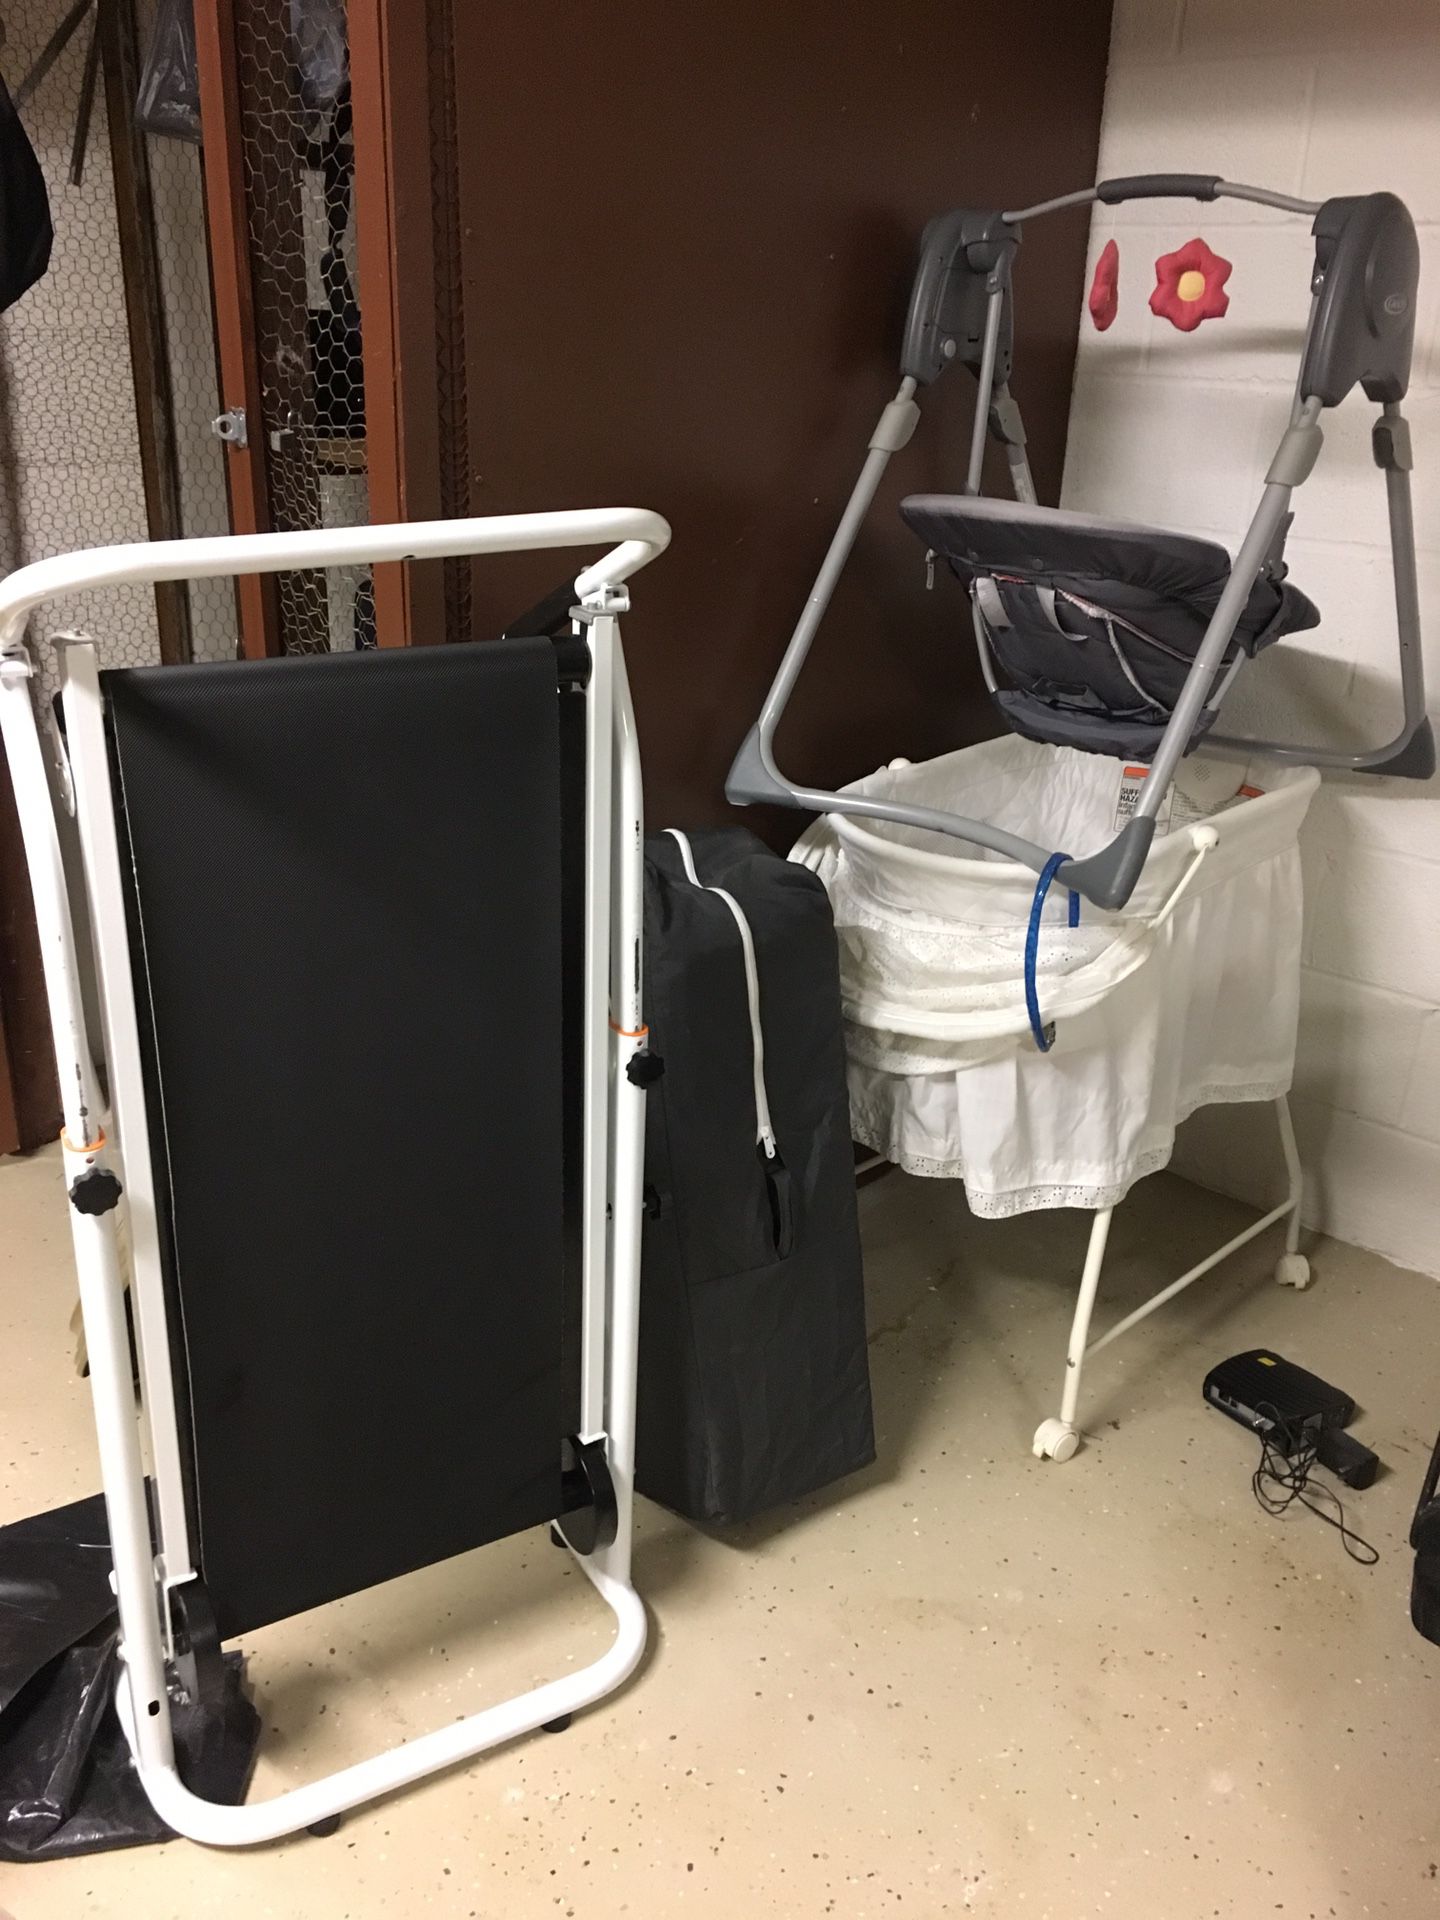 Manual treadmill, two babies cribs and swing all for $100